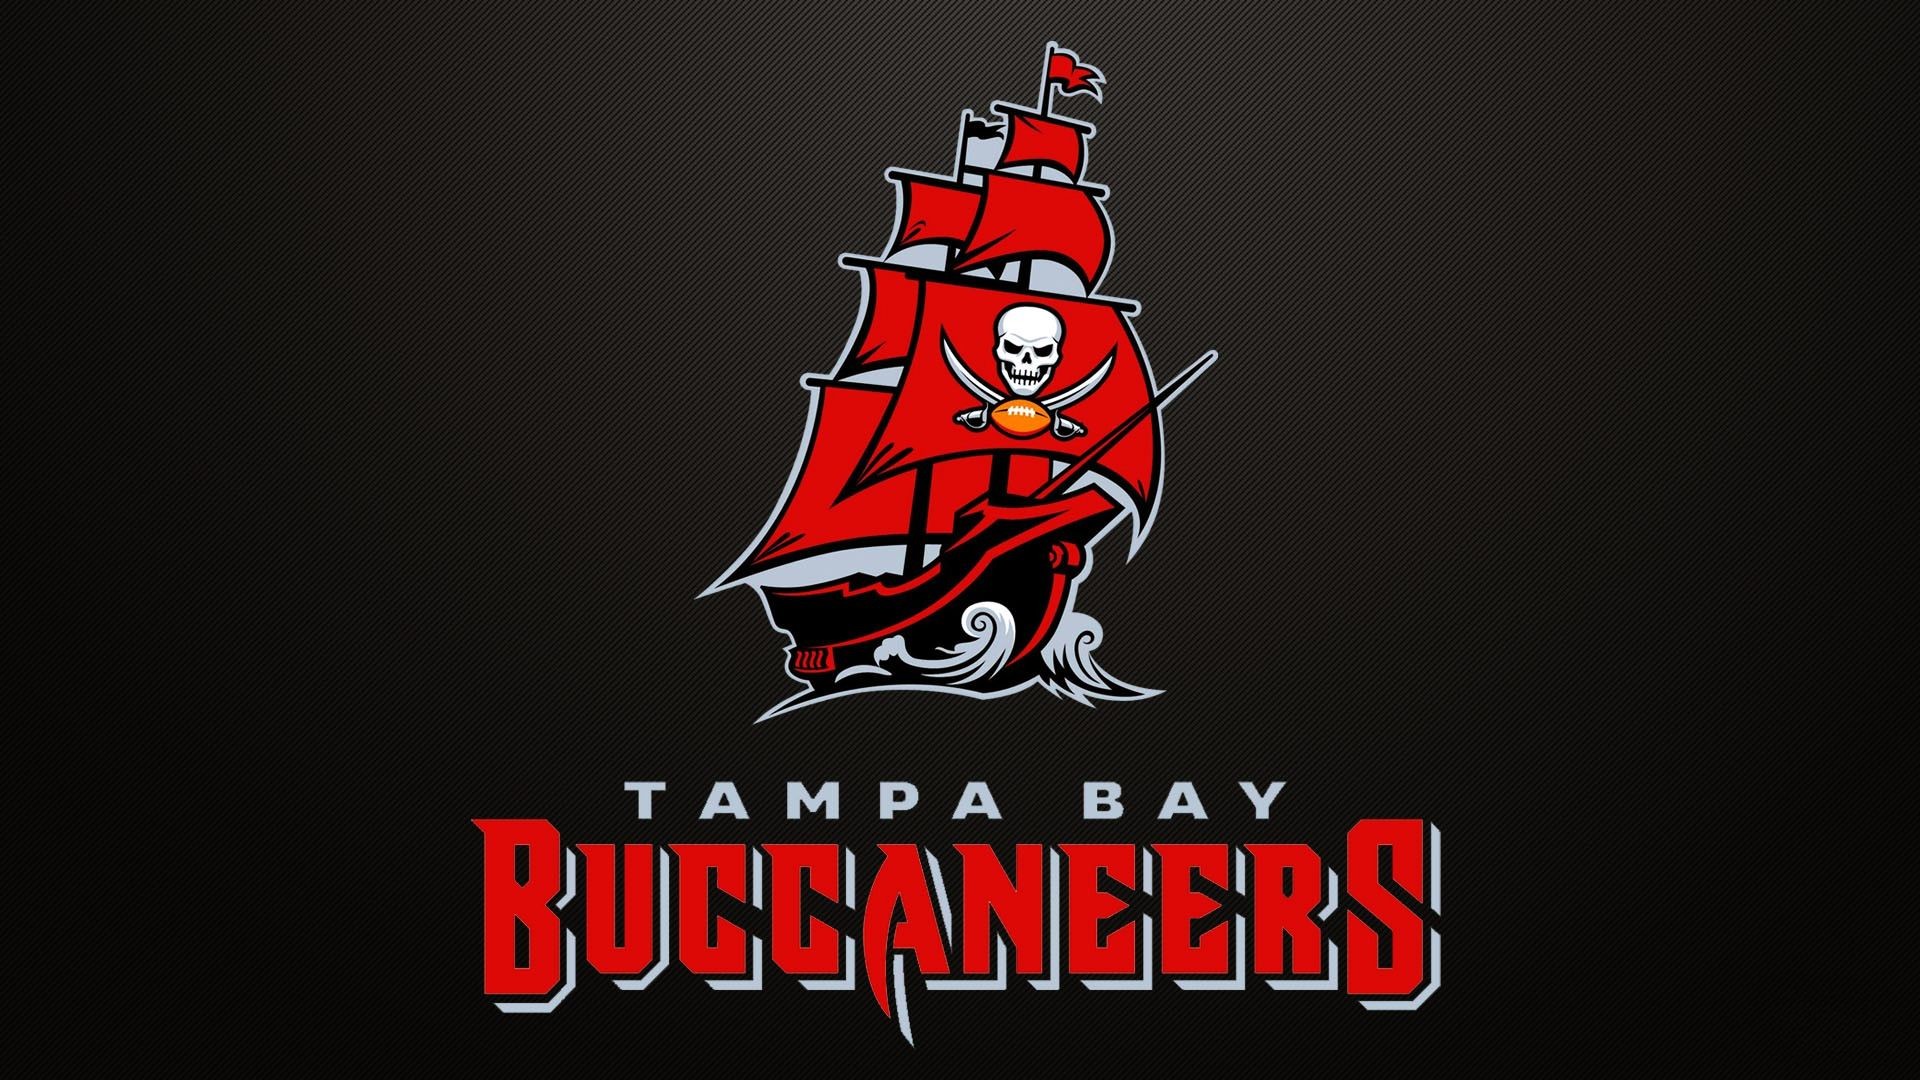 Buccaneers Logo Wallpaper Check out our buccaneers logo selection for